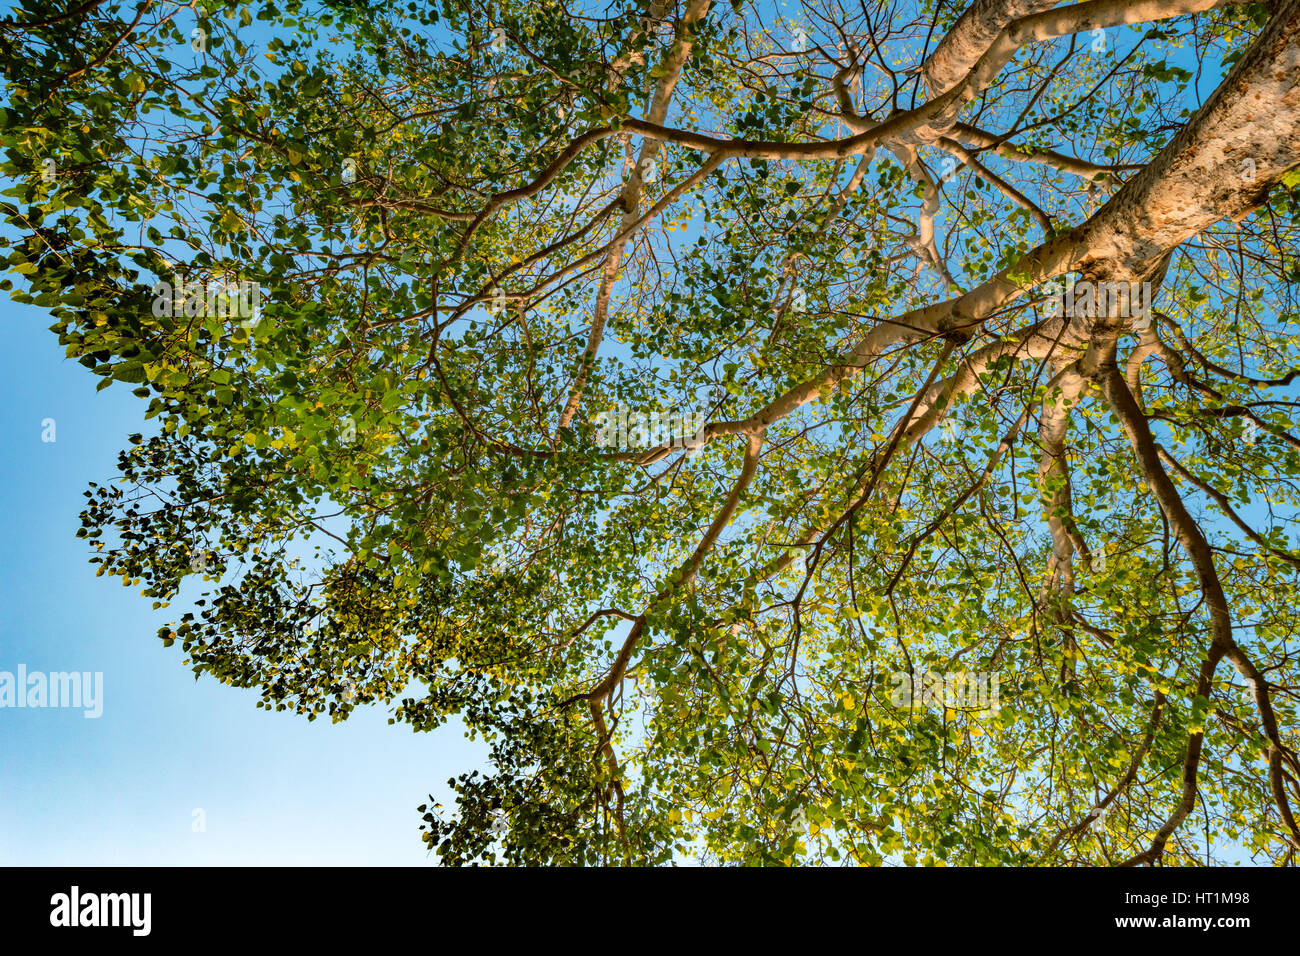 Giant stem of pterocarpus indicus tree against sun on summer day. Stock Photo